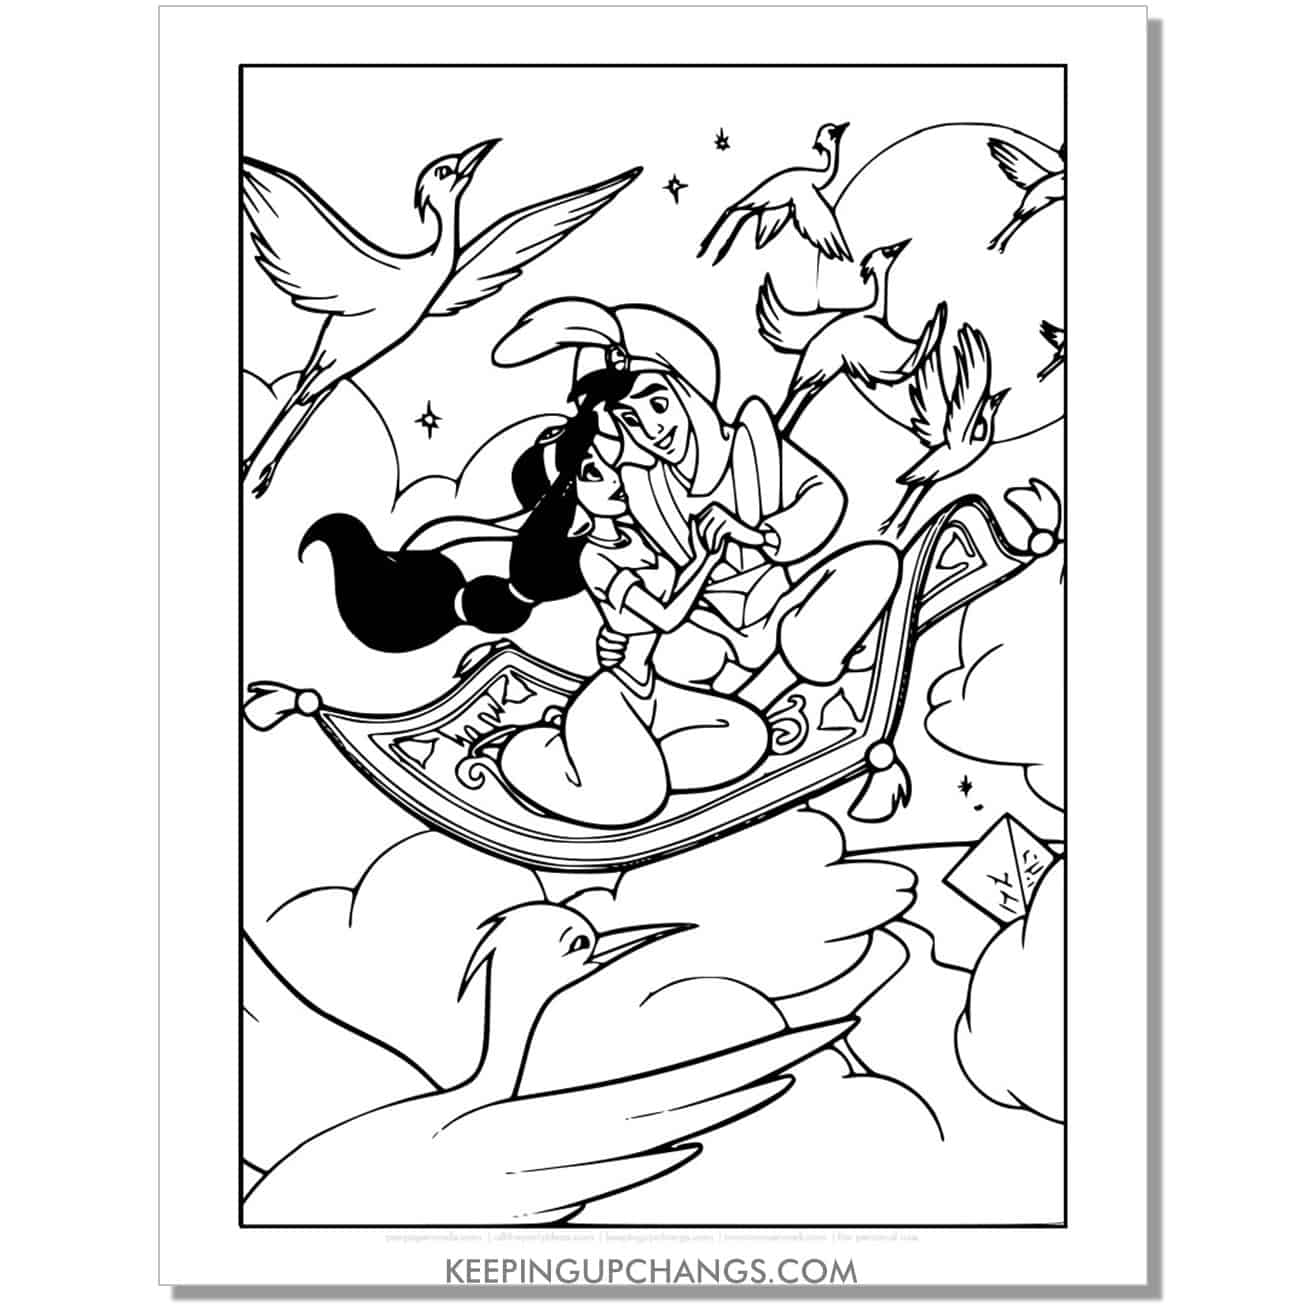 jasmine and aladdin flying on magic carpet coloring page, sheet.